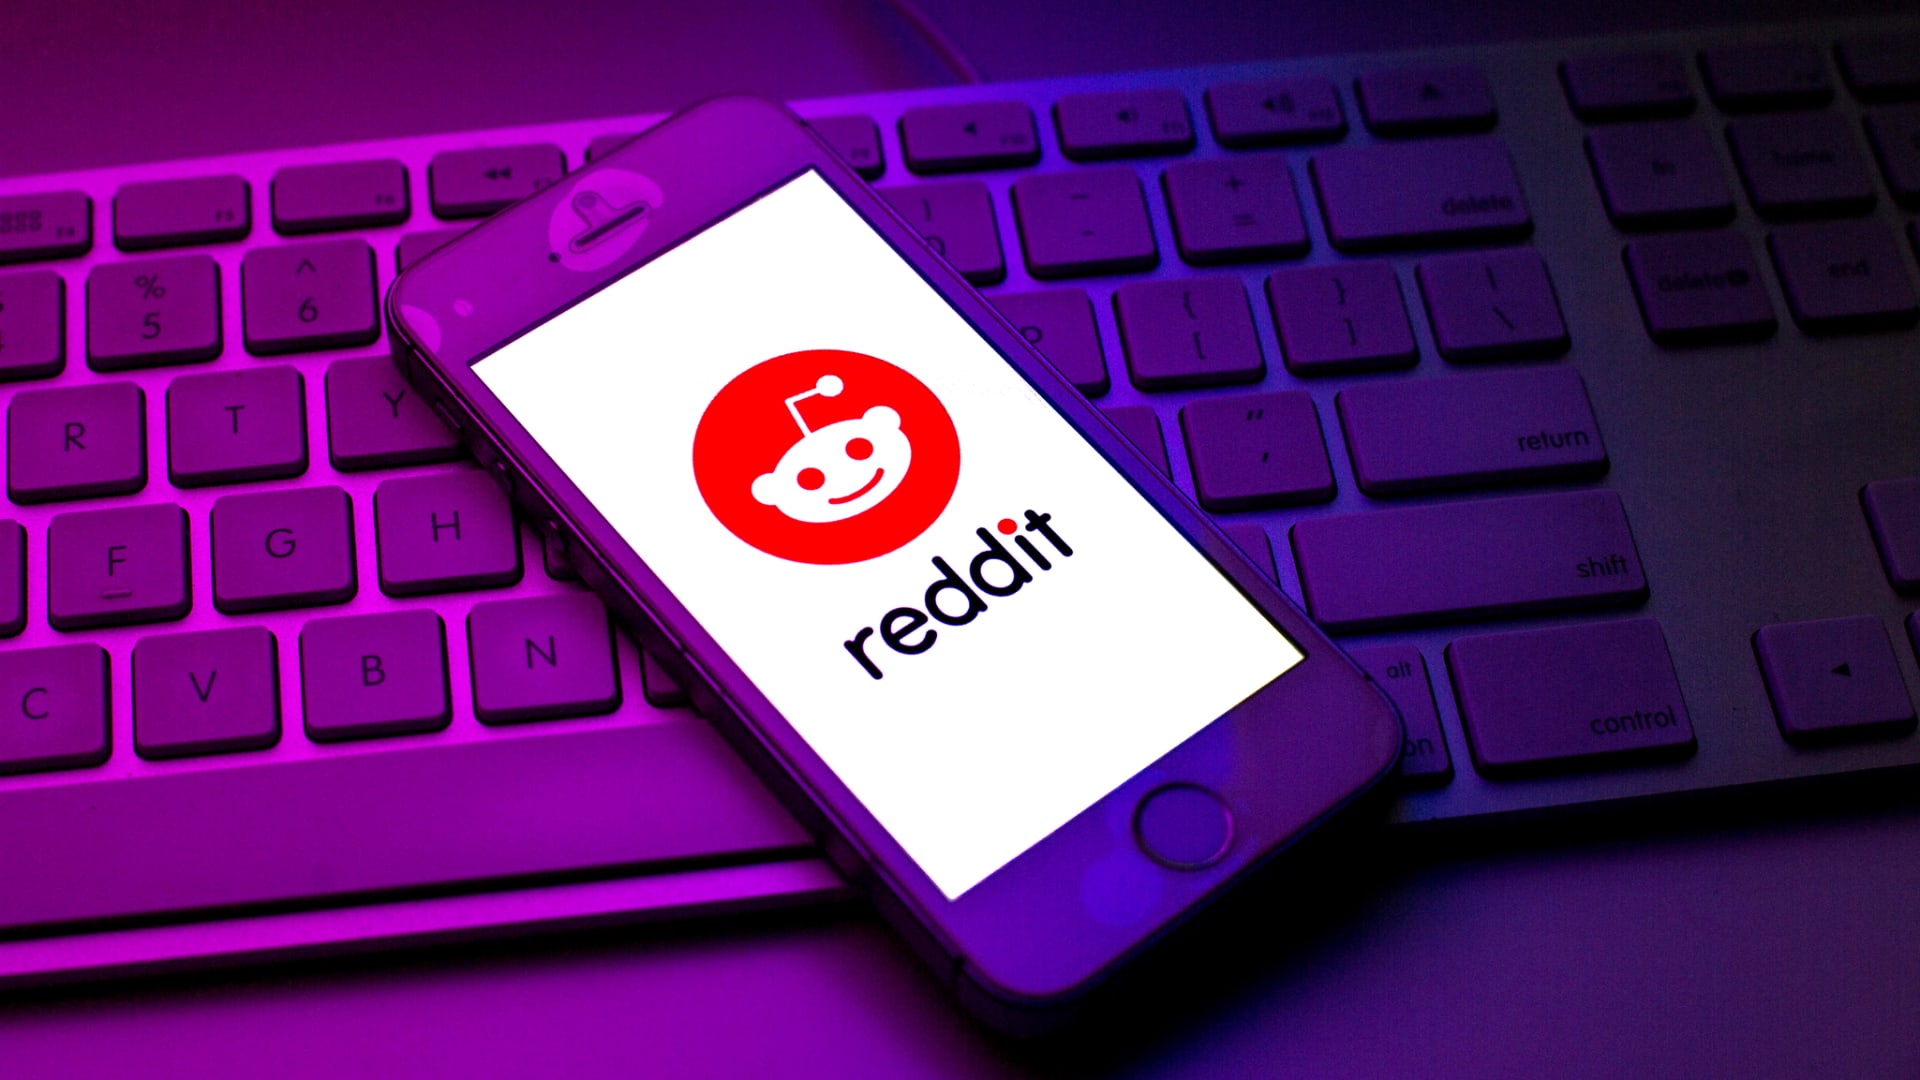 The Real Reason for Reddit's IPO Plan Should Come as No Surprise